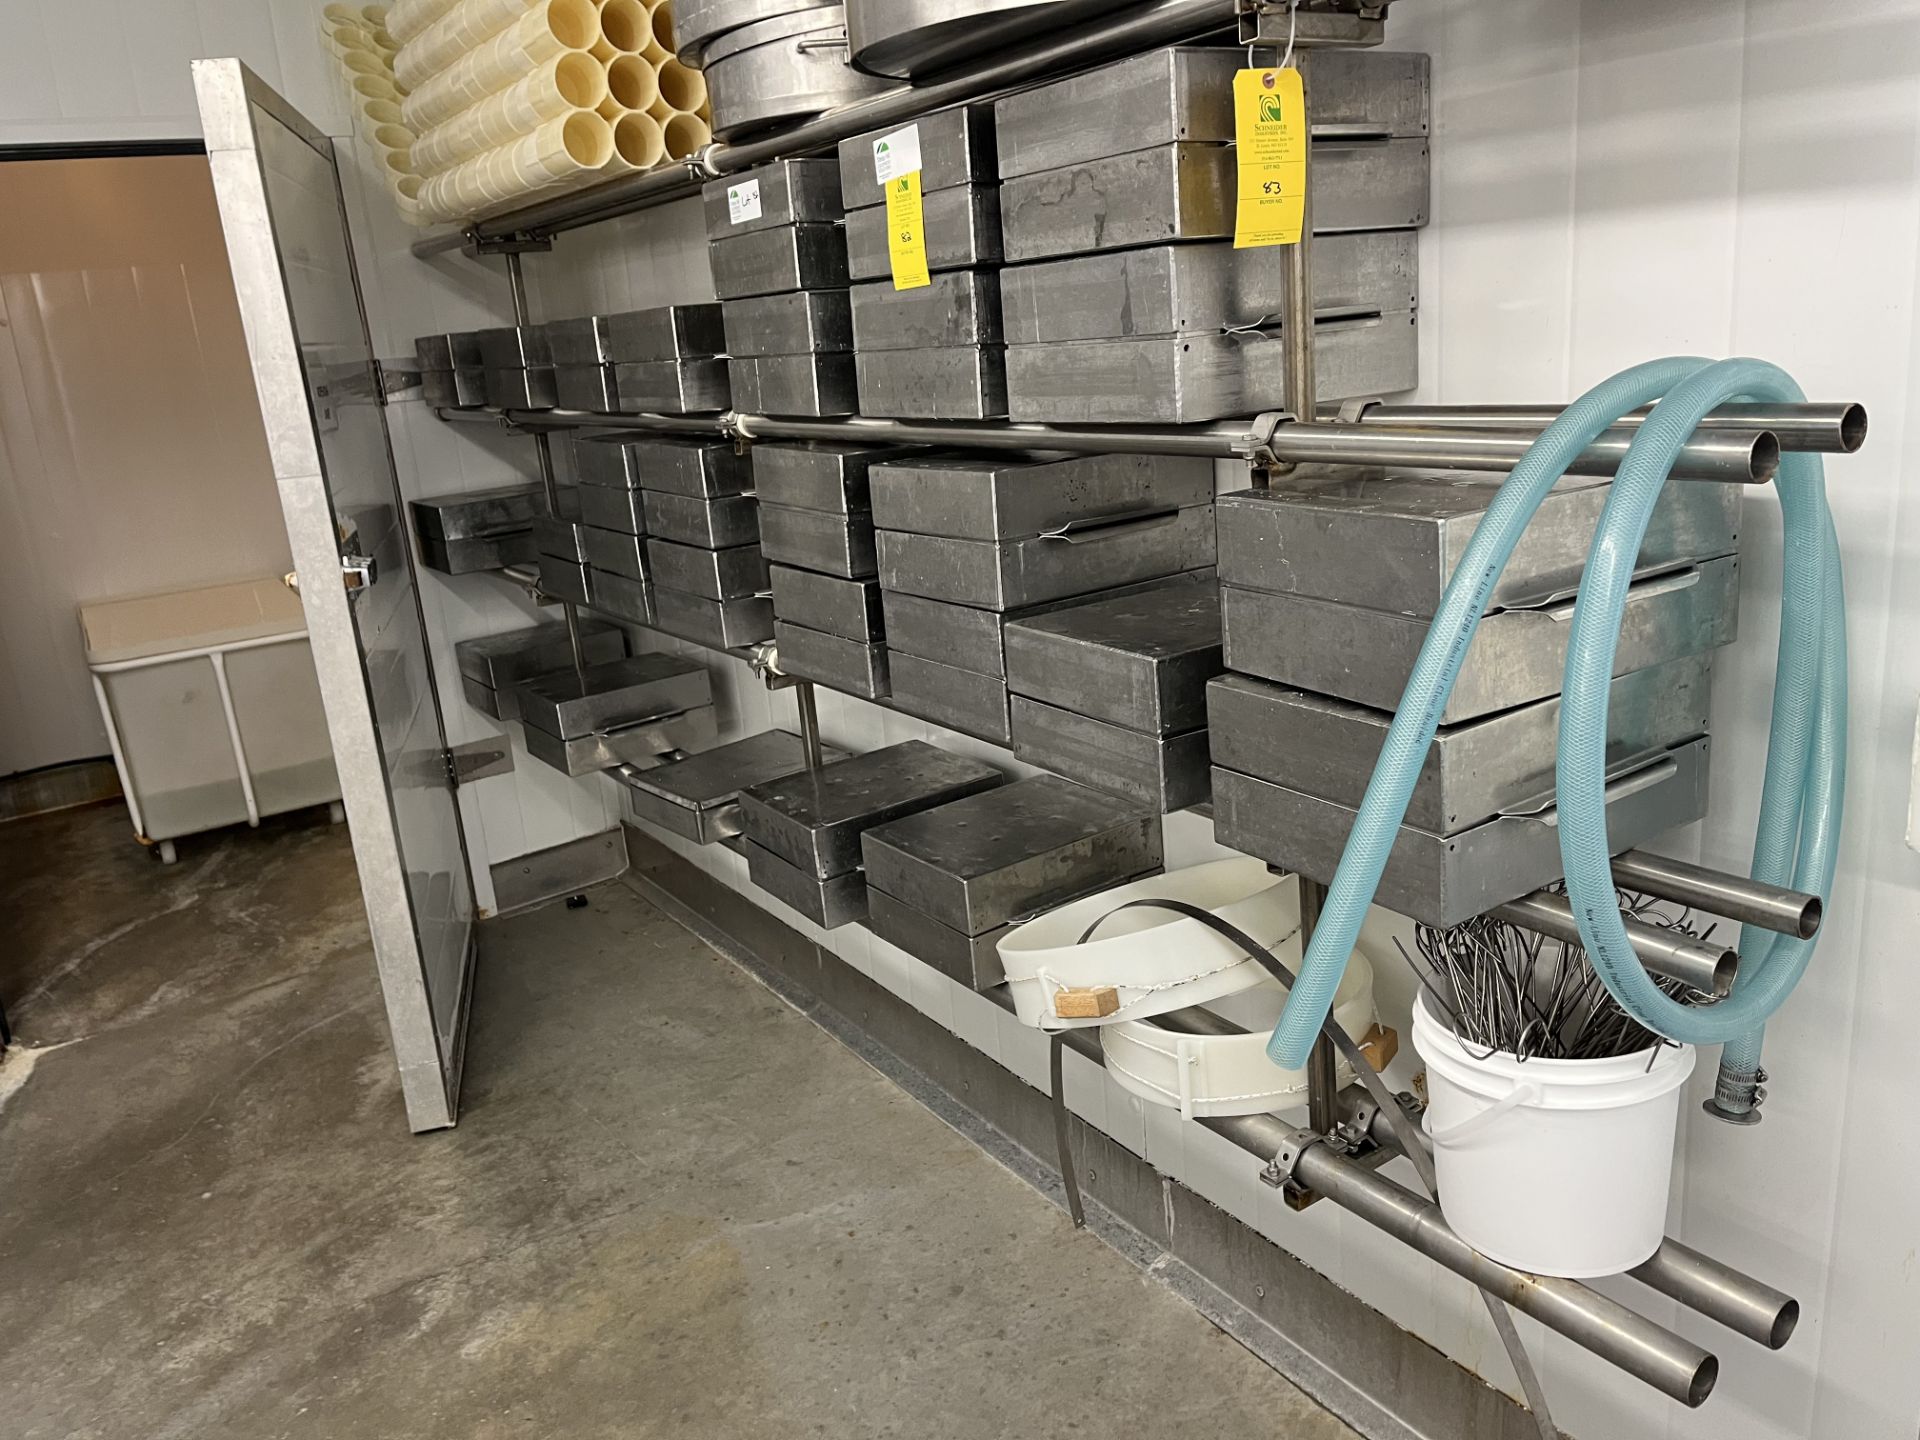 Stainless wall rack for cheese moulds - Image 2 of 6